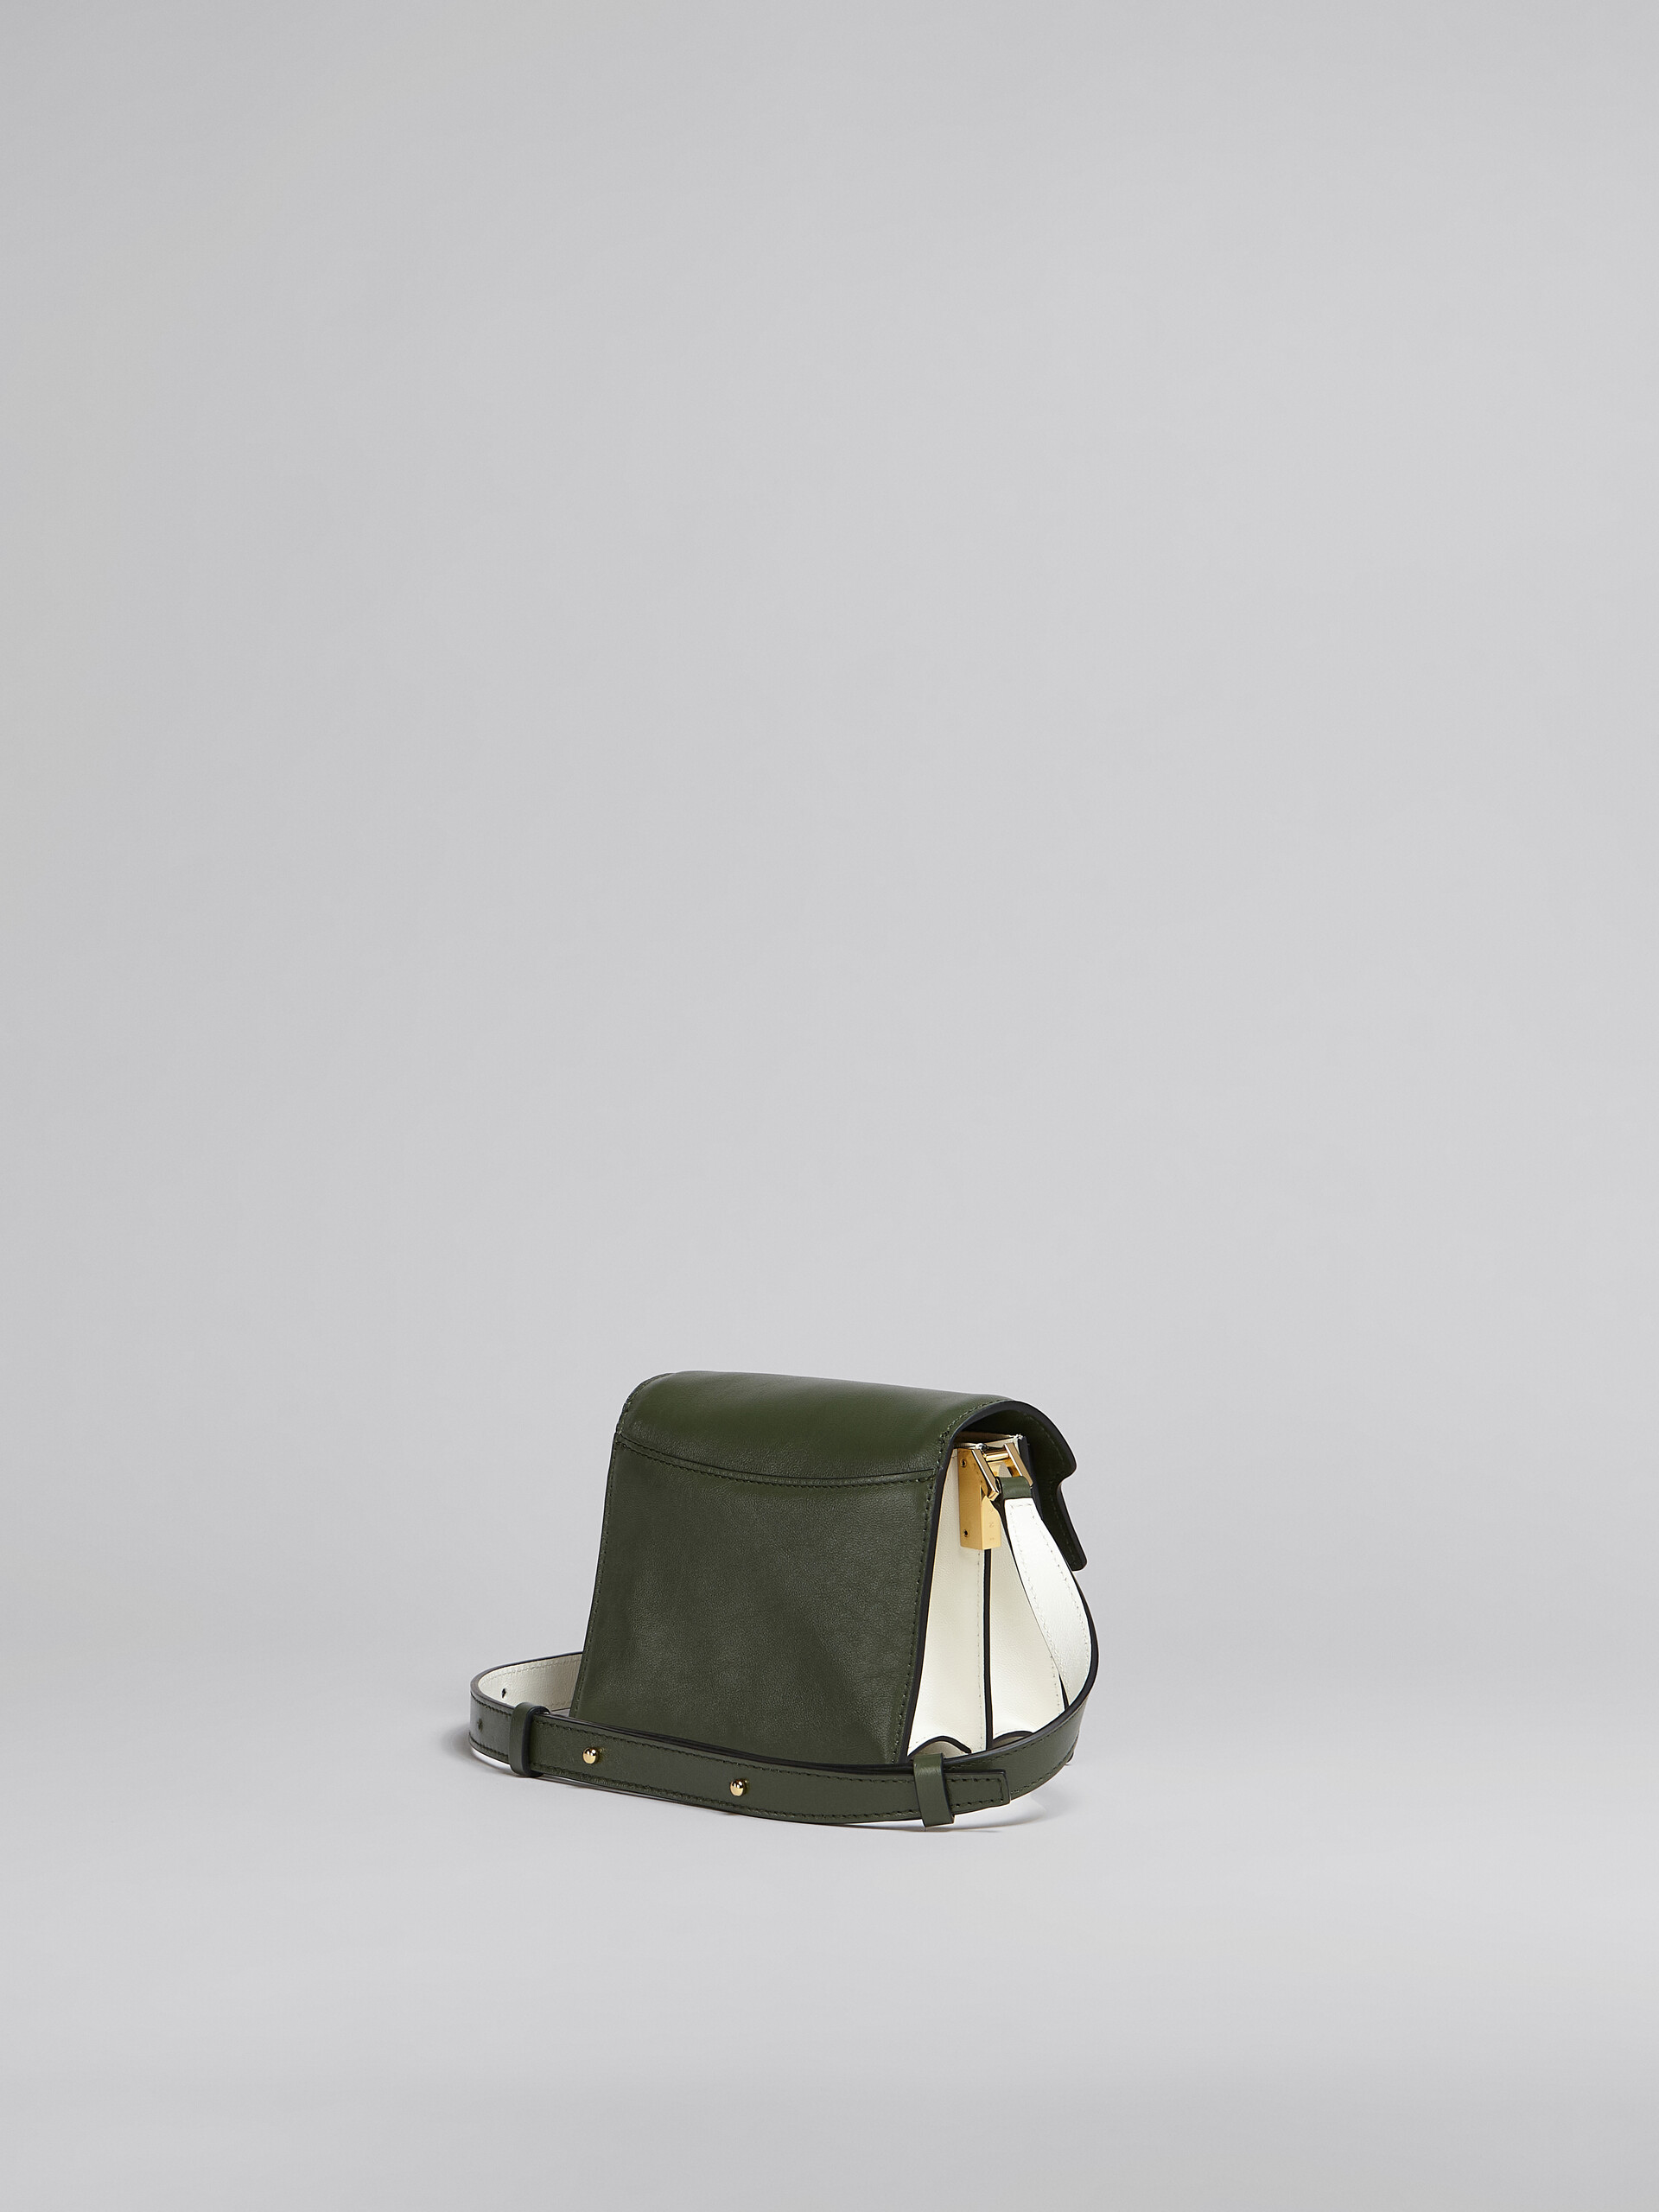 Trunk Soft Mini Bag in green and white leather - Shoulder Bags - Image 3